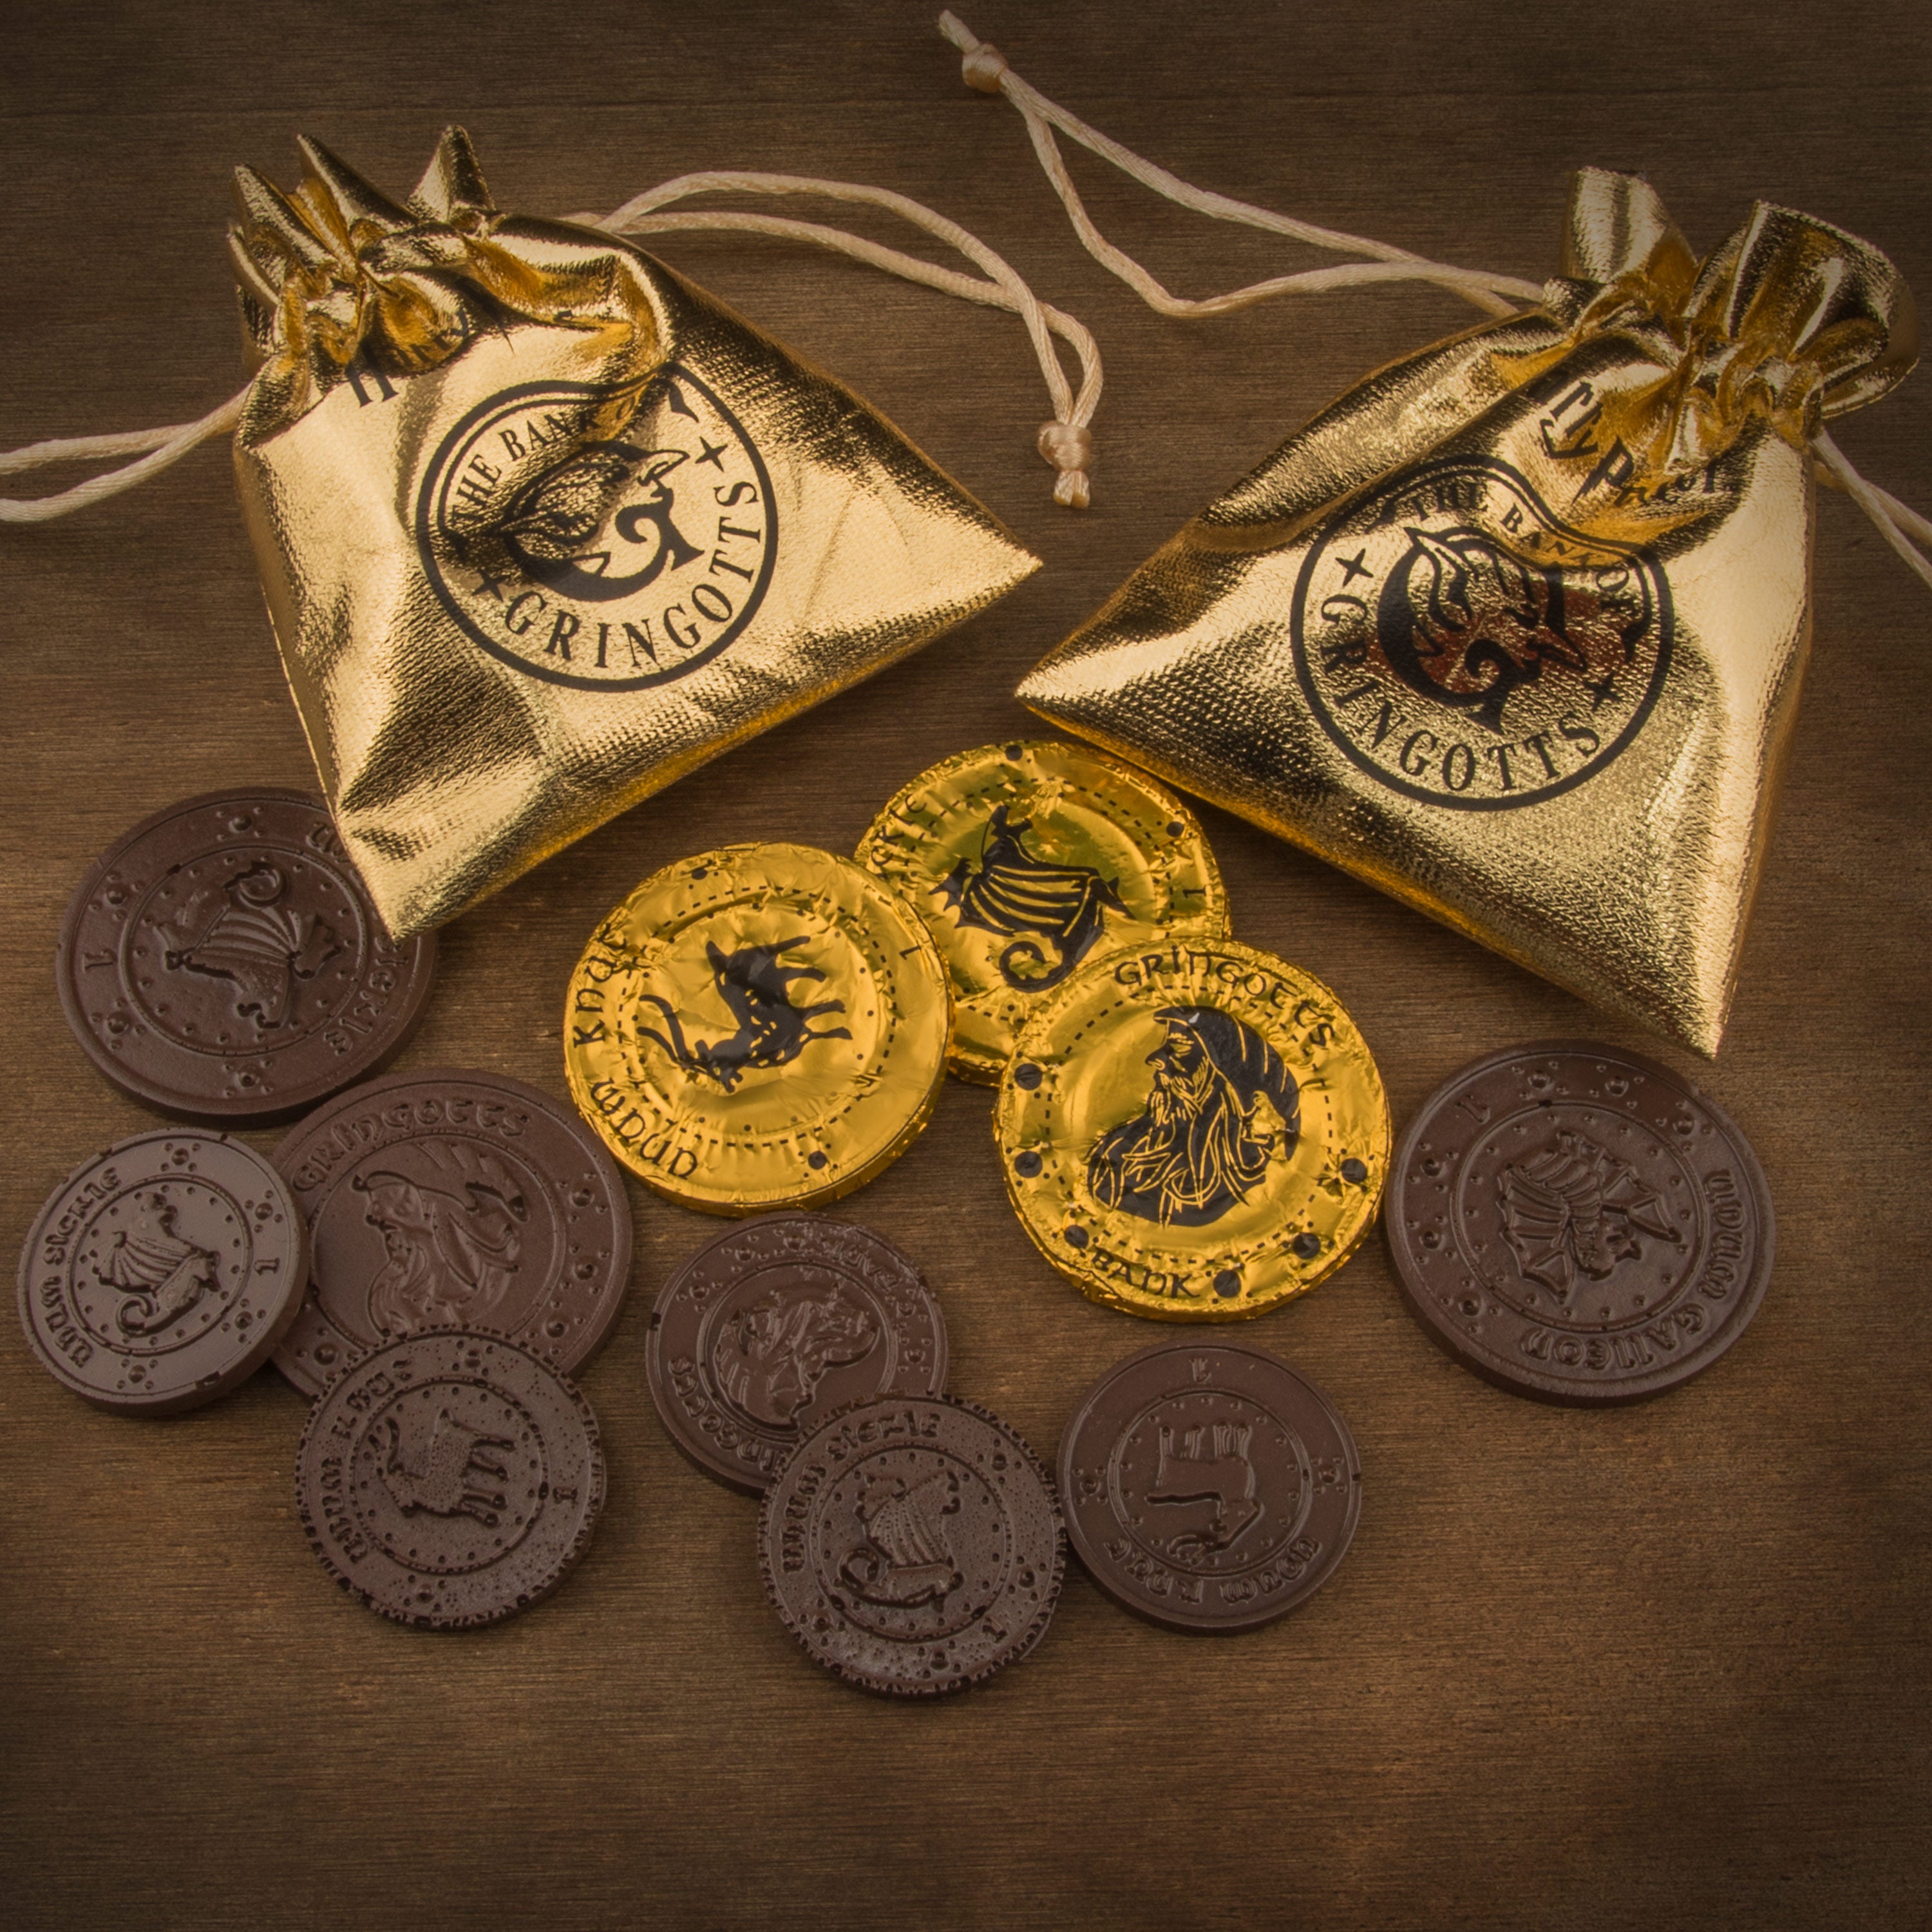 prototype fortryde prototype How to make your own Gringotts chocolate coins | Recipe – Cinereplicas USA